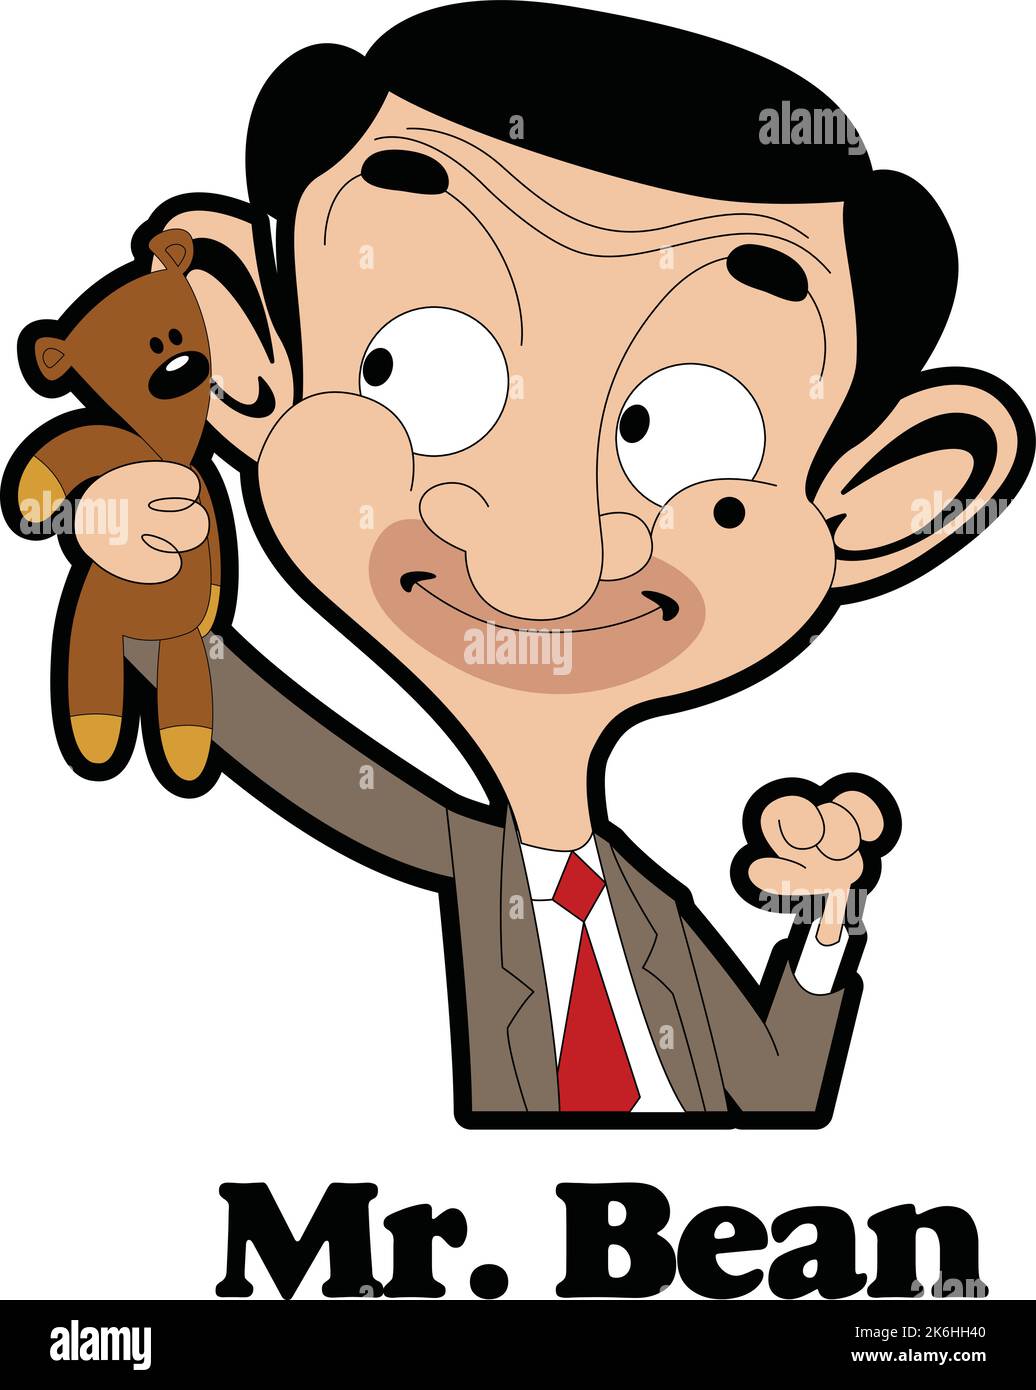 Mr Bean is a British comedian. Stock Vector